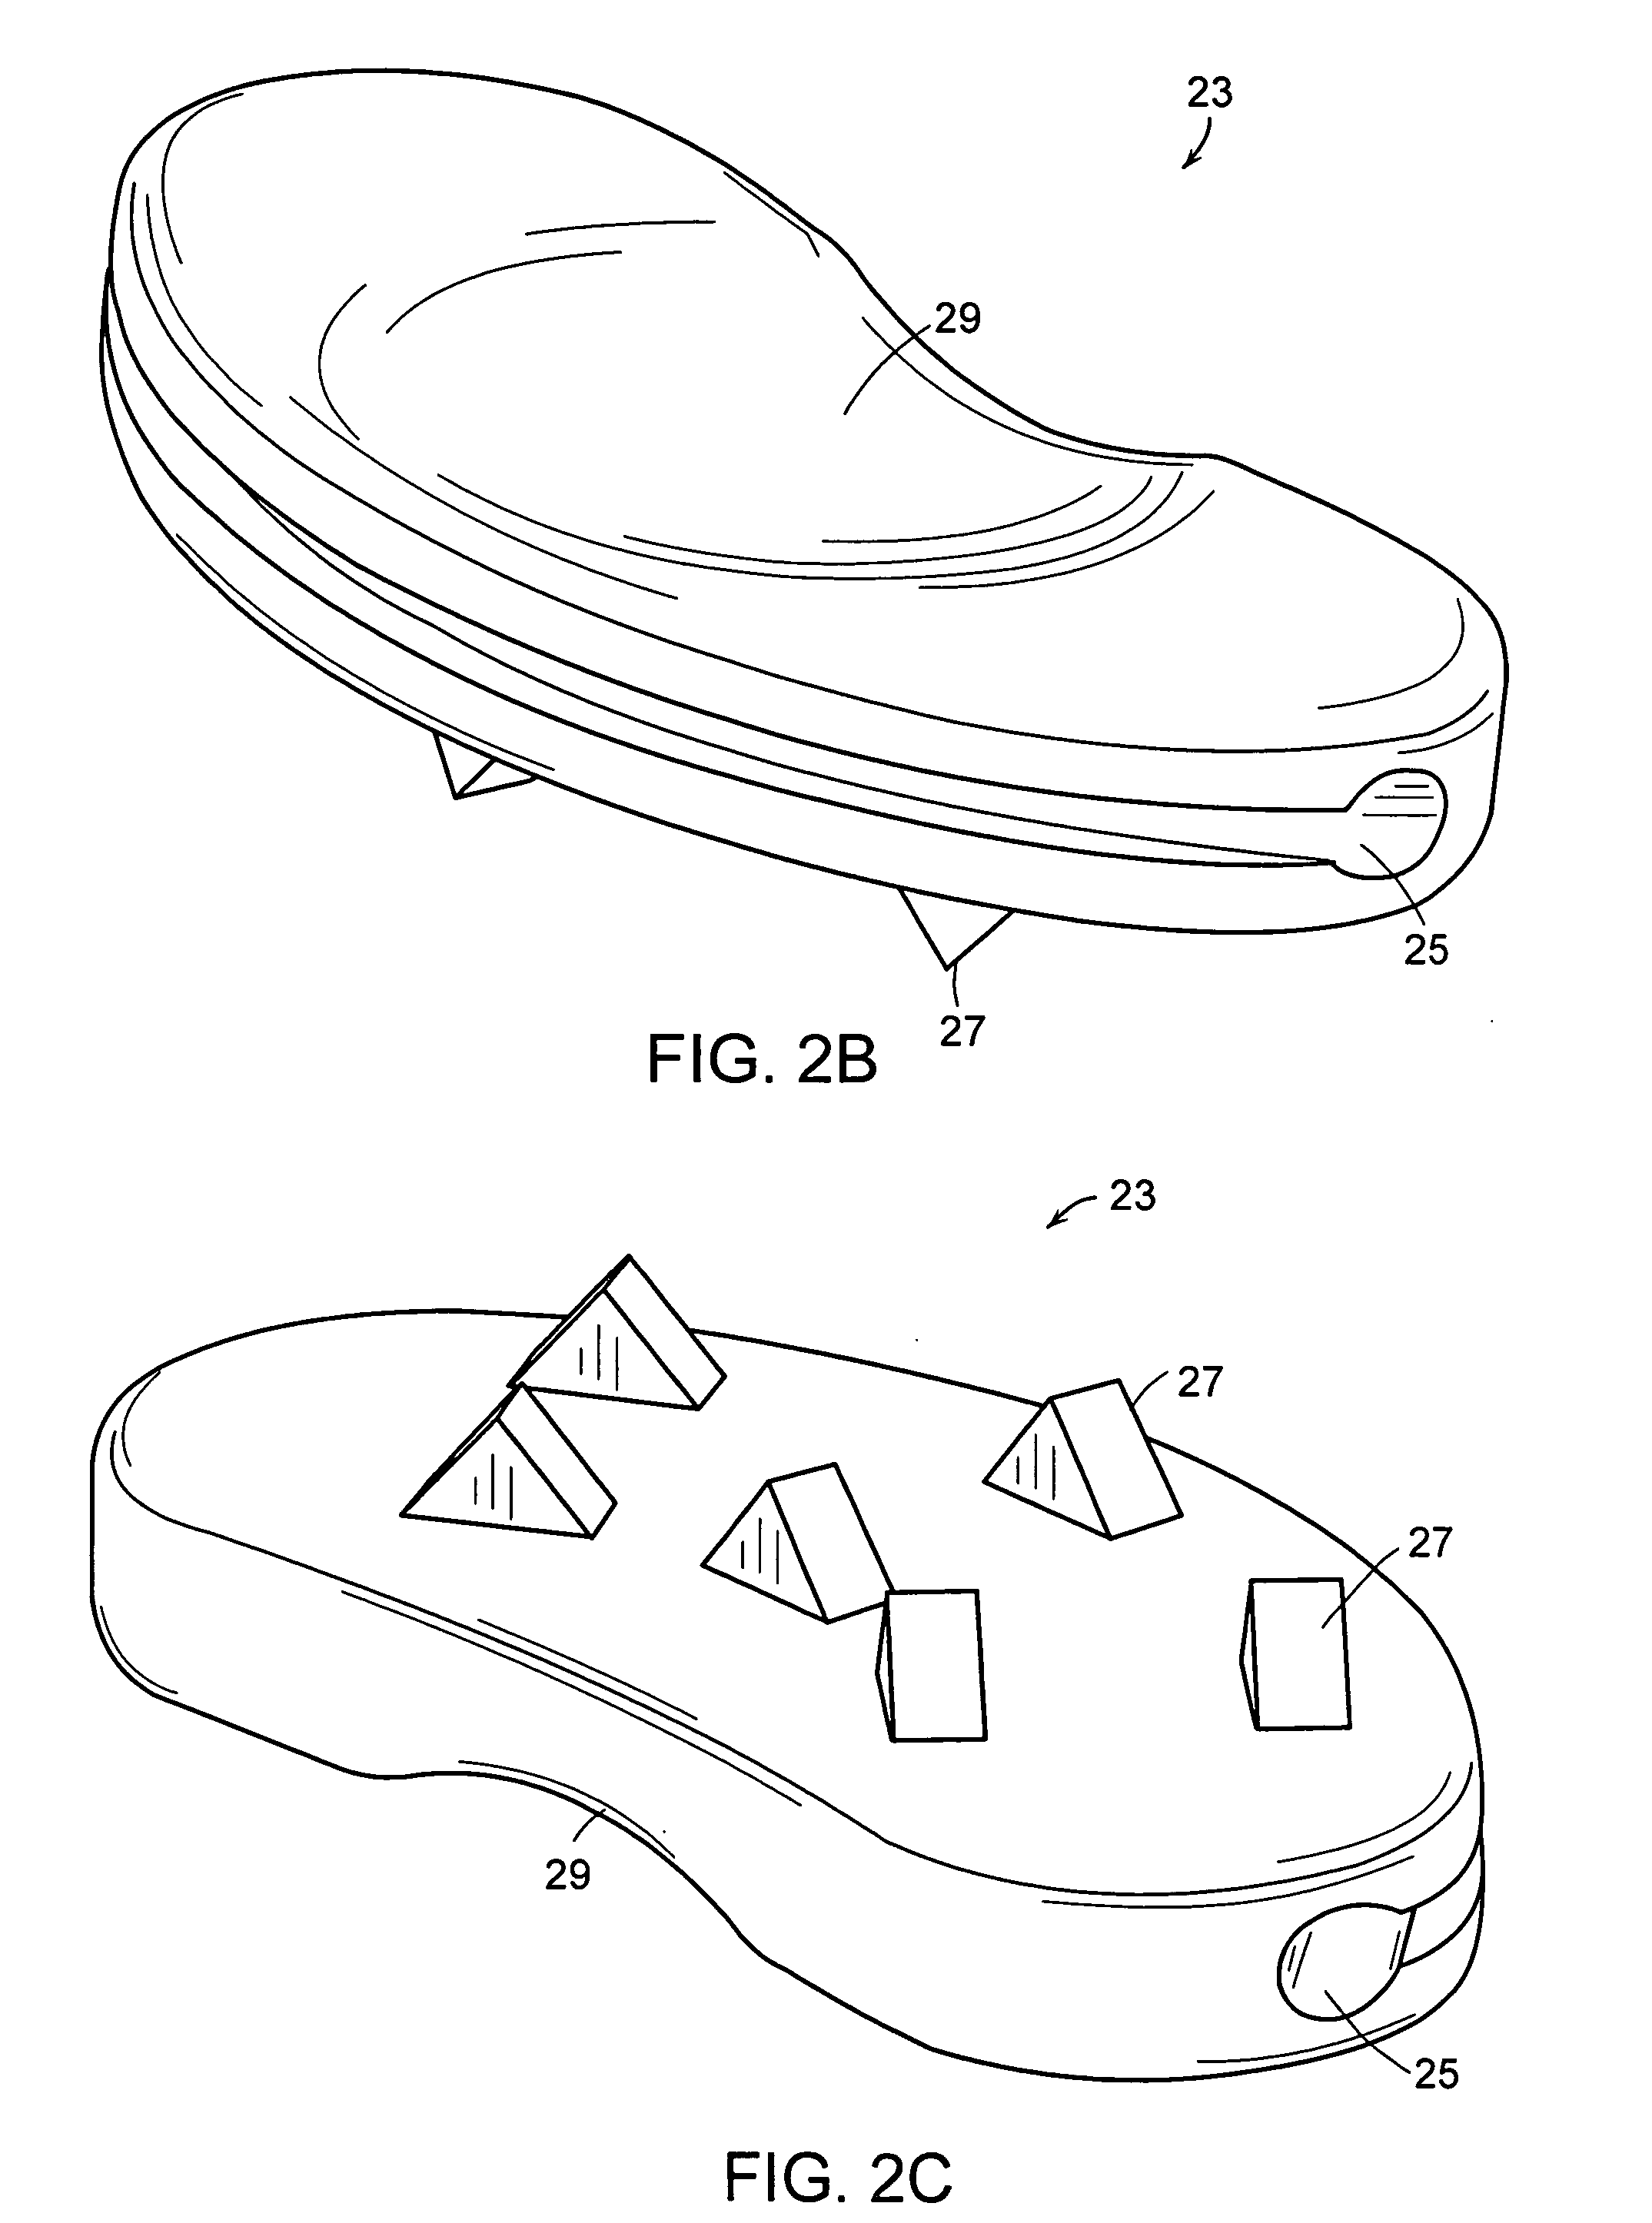 Intervertebral prosthetic disc and method for installing using a guidewire